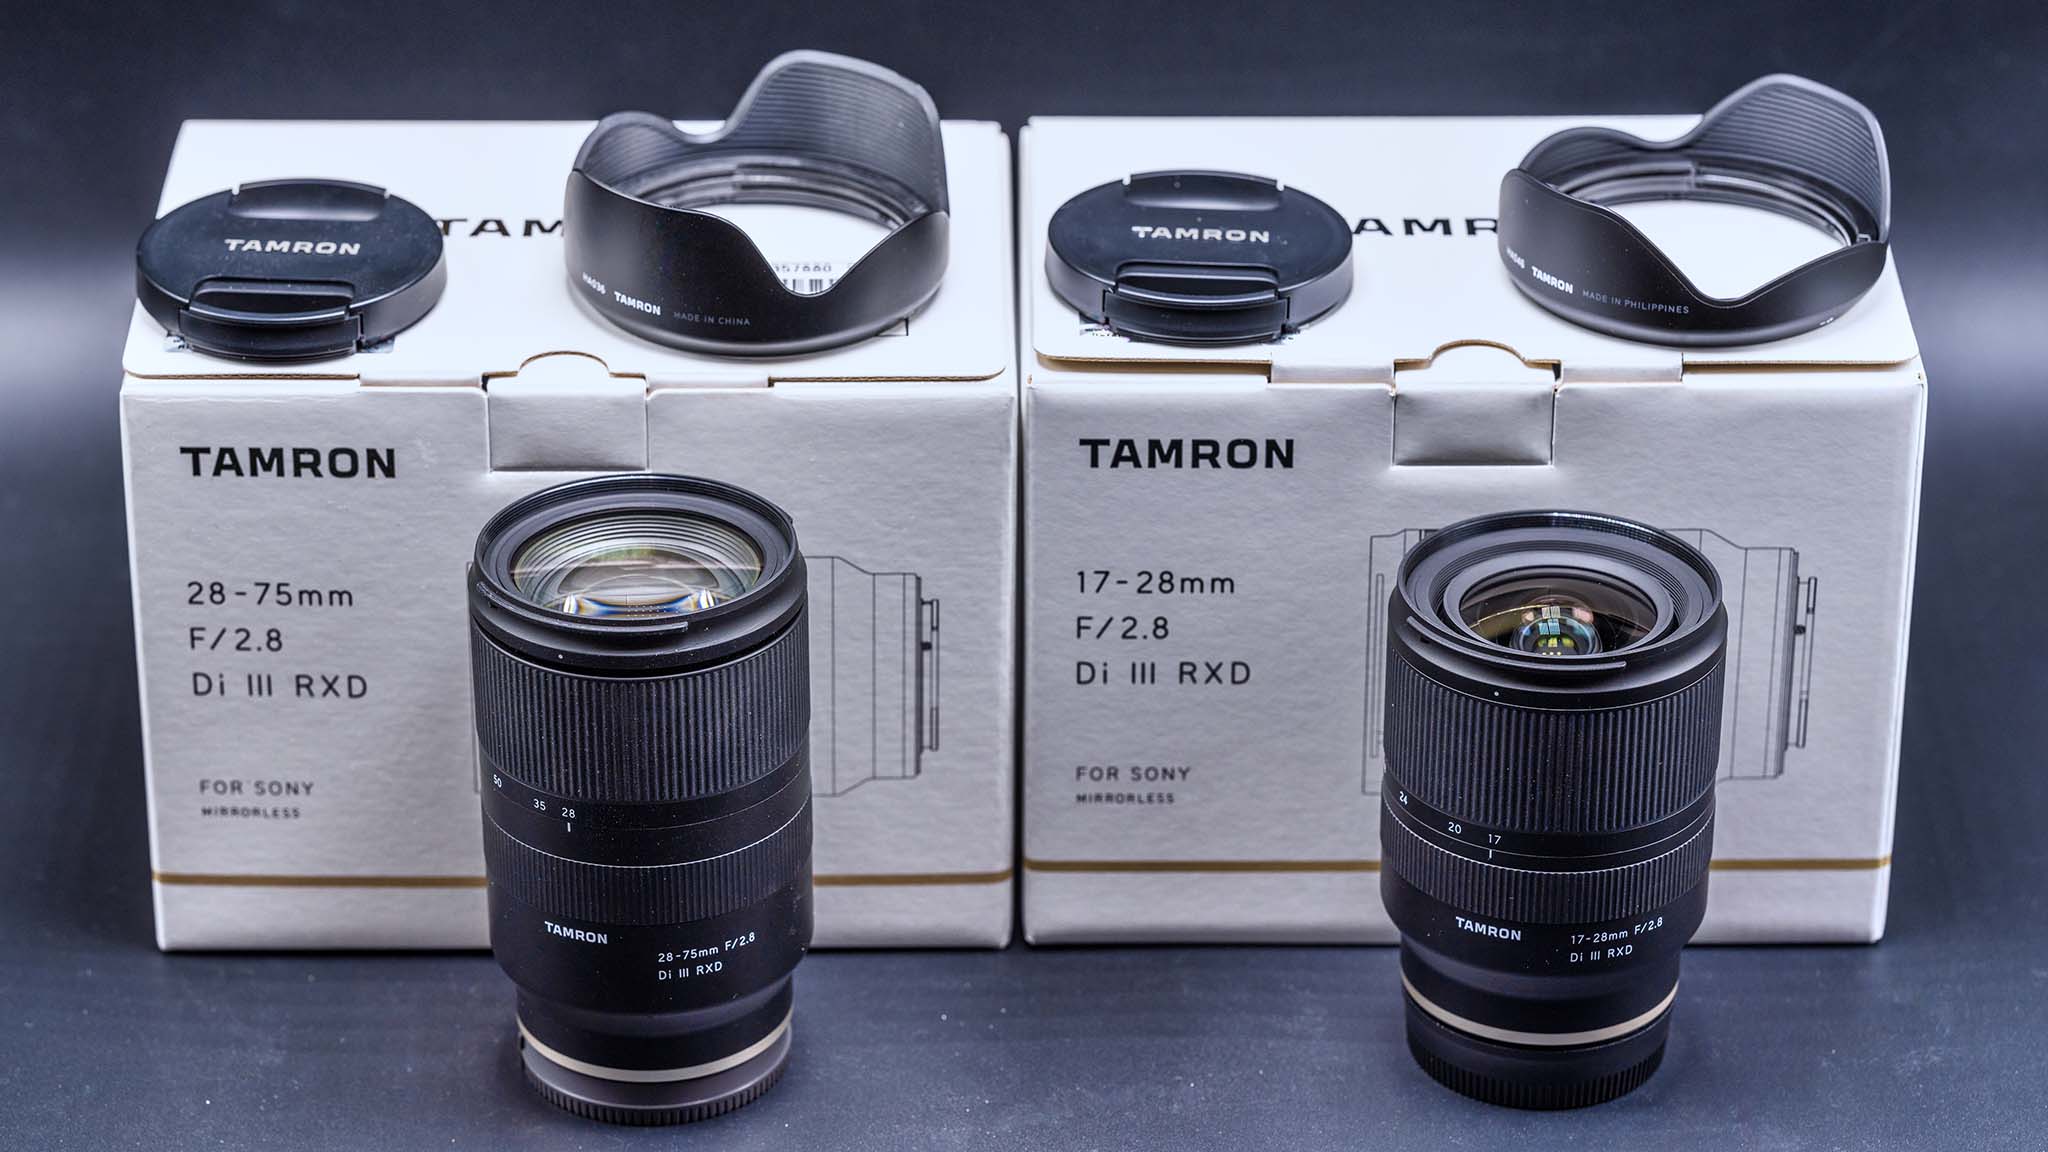 Tamron 17-28mm f/2.8 Di III RXD FE Made in Vietnam and Tamron 28 